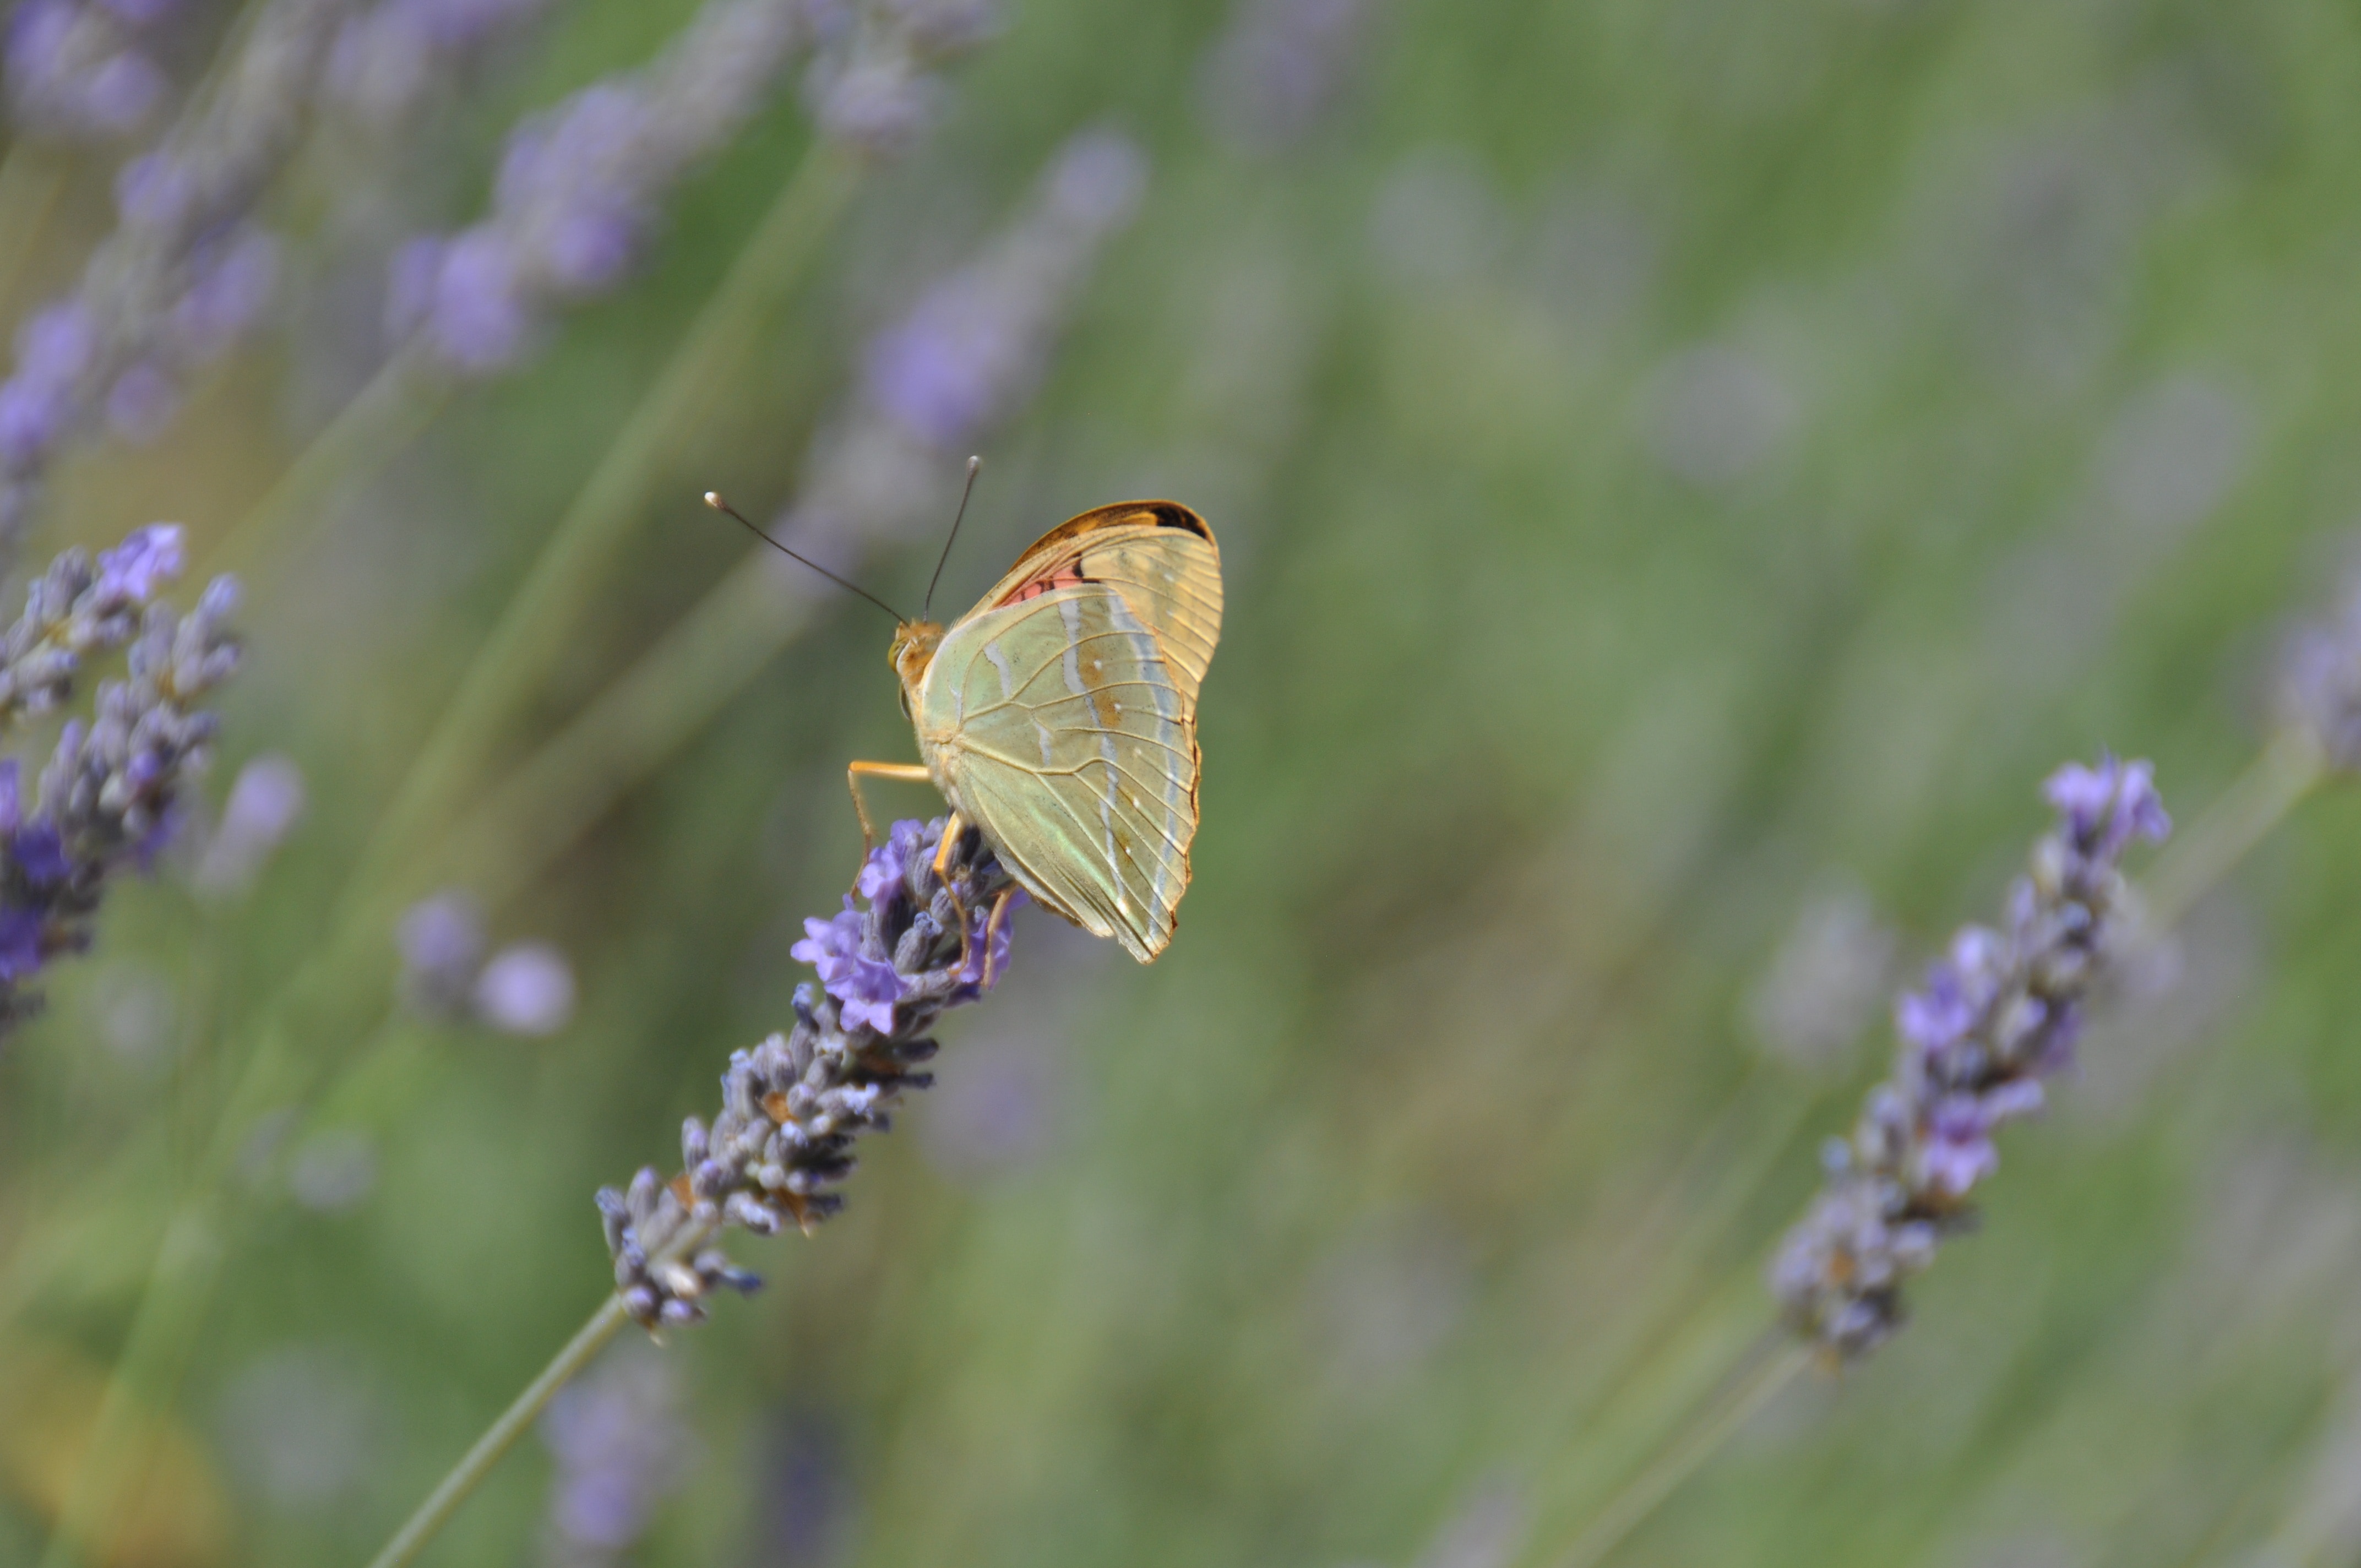 Flowers, Butterfly, Nature, Lavender, insect, nature